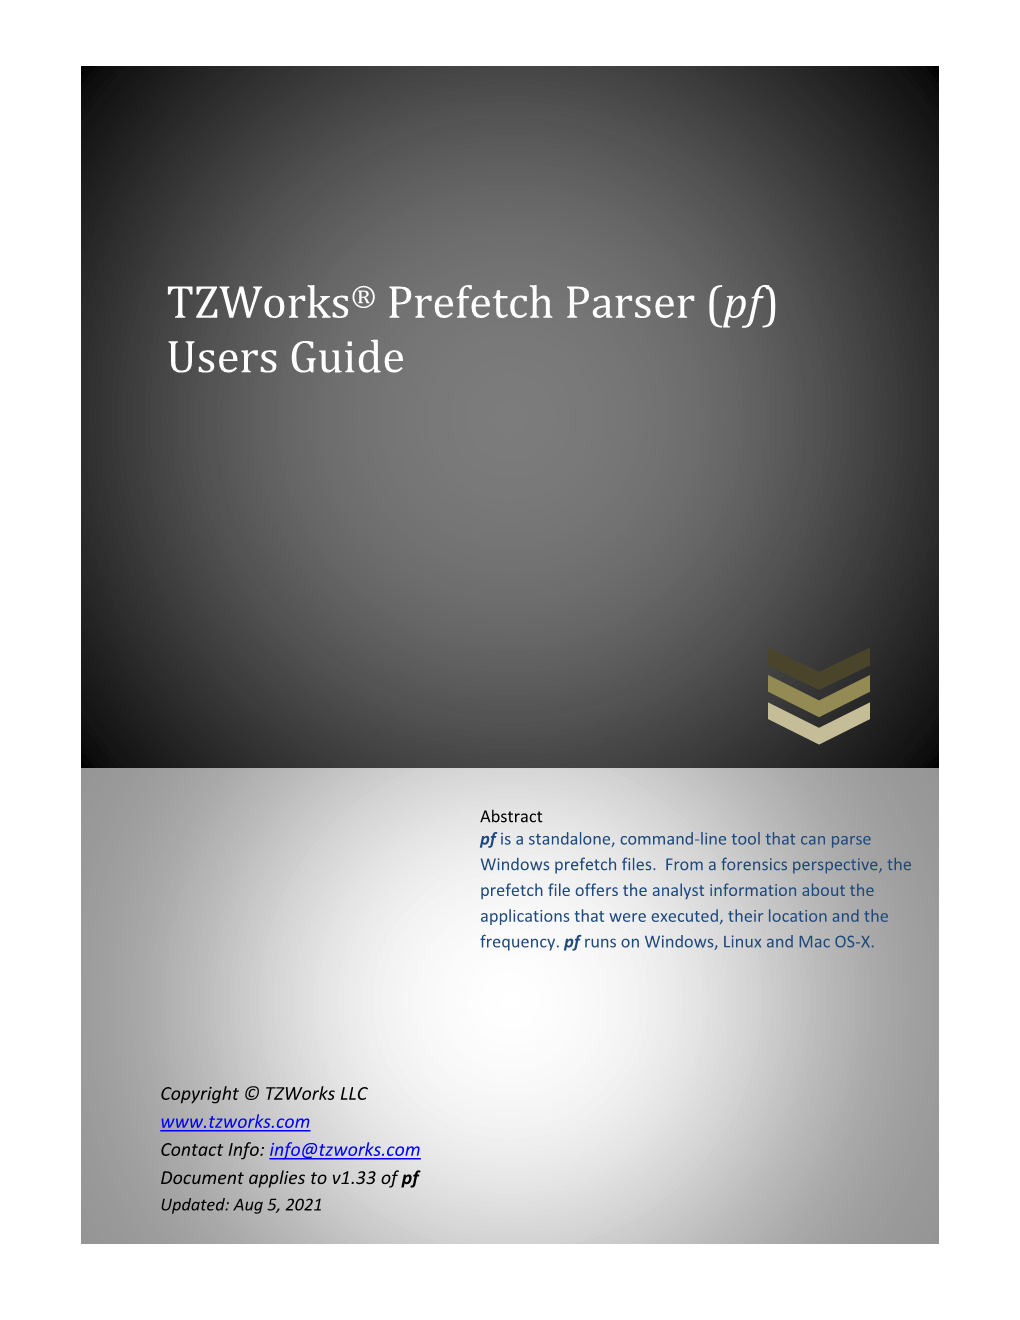 Tzworks Prefetch Parser (Pf) Users Guide